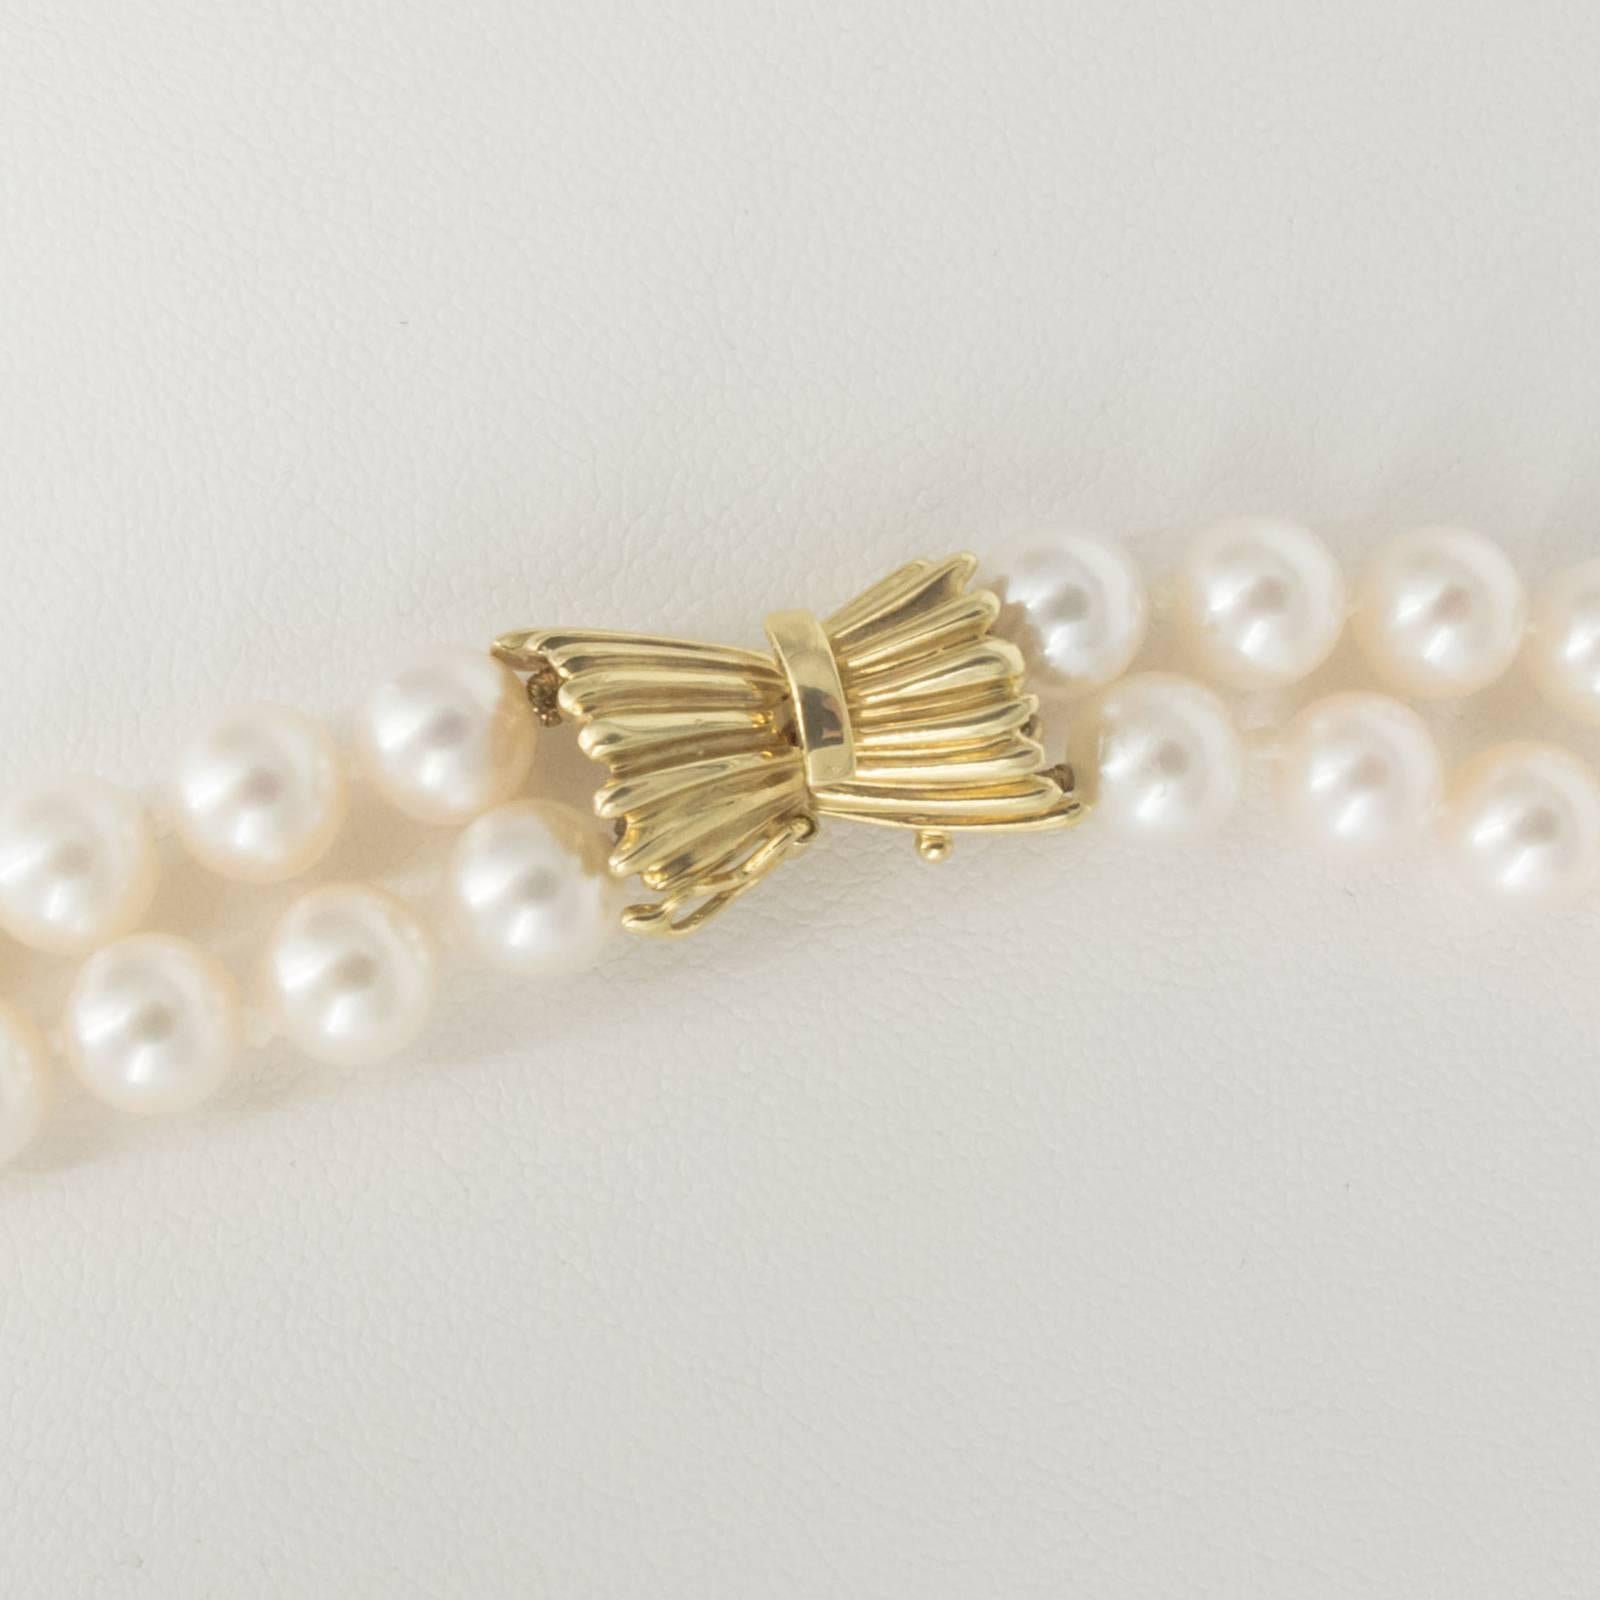 A fine double strand of AA quality Japanese Akoya Cultured Pearls measures 16 and 17 inches respectively, caught with a beautiful, bow shaped 14 Karat Gold clasp.

There are 106, well rounded and matched 7.00-7.50mm Pearls in this classic and